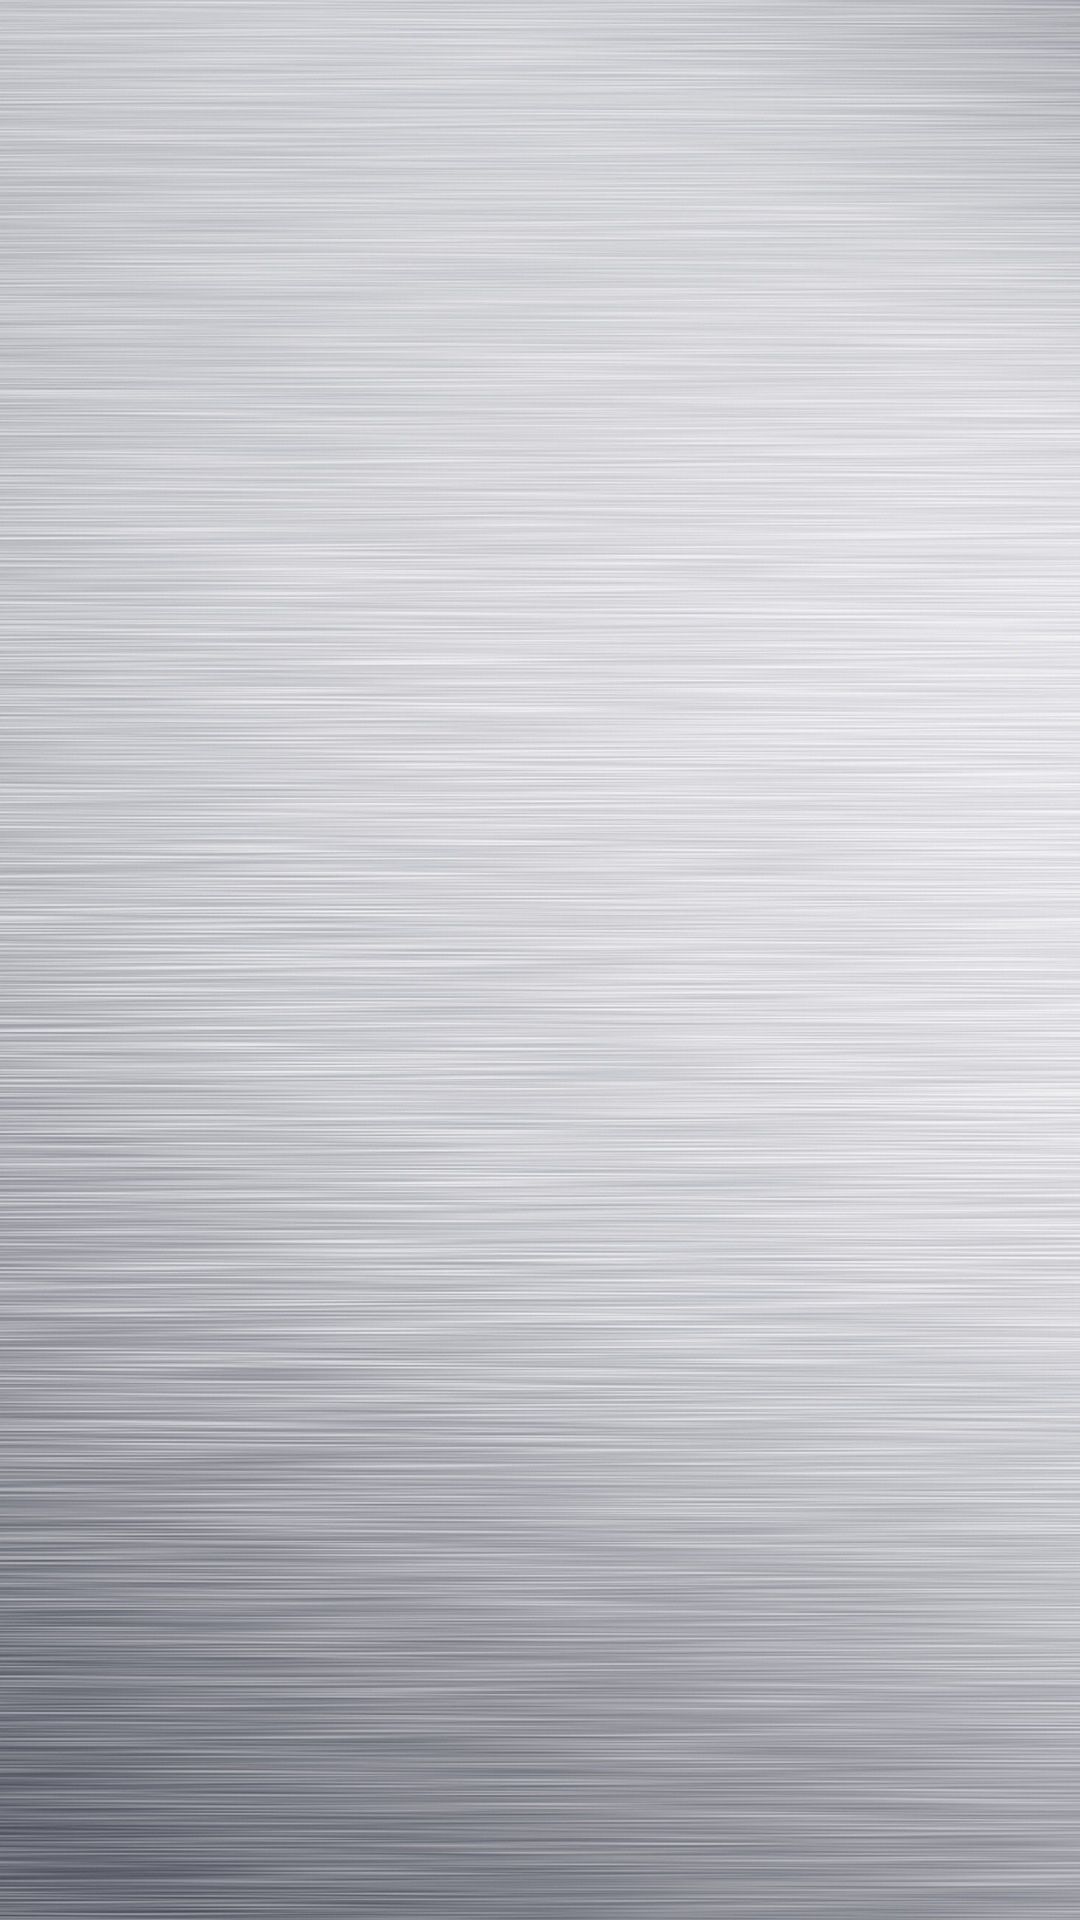 Simple Horizontal Brushed Metal Surface Android Wallpaper free download